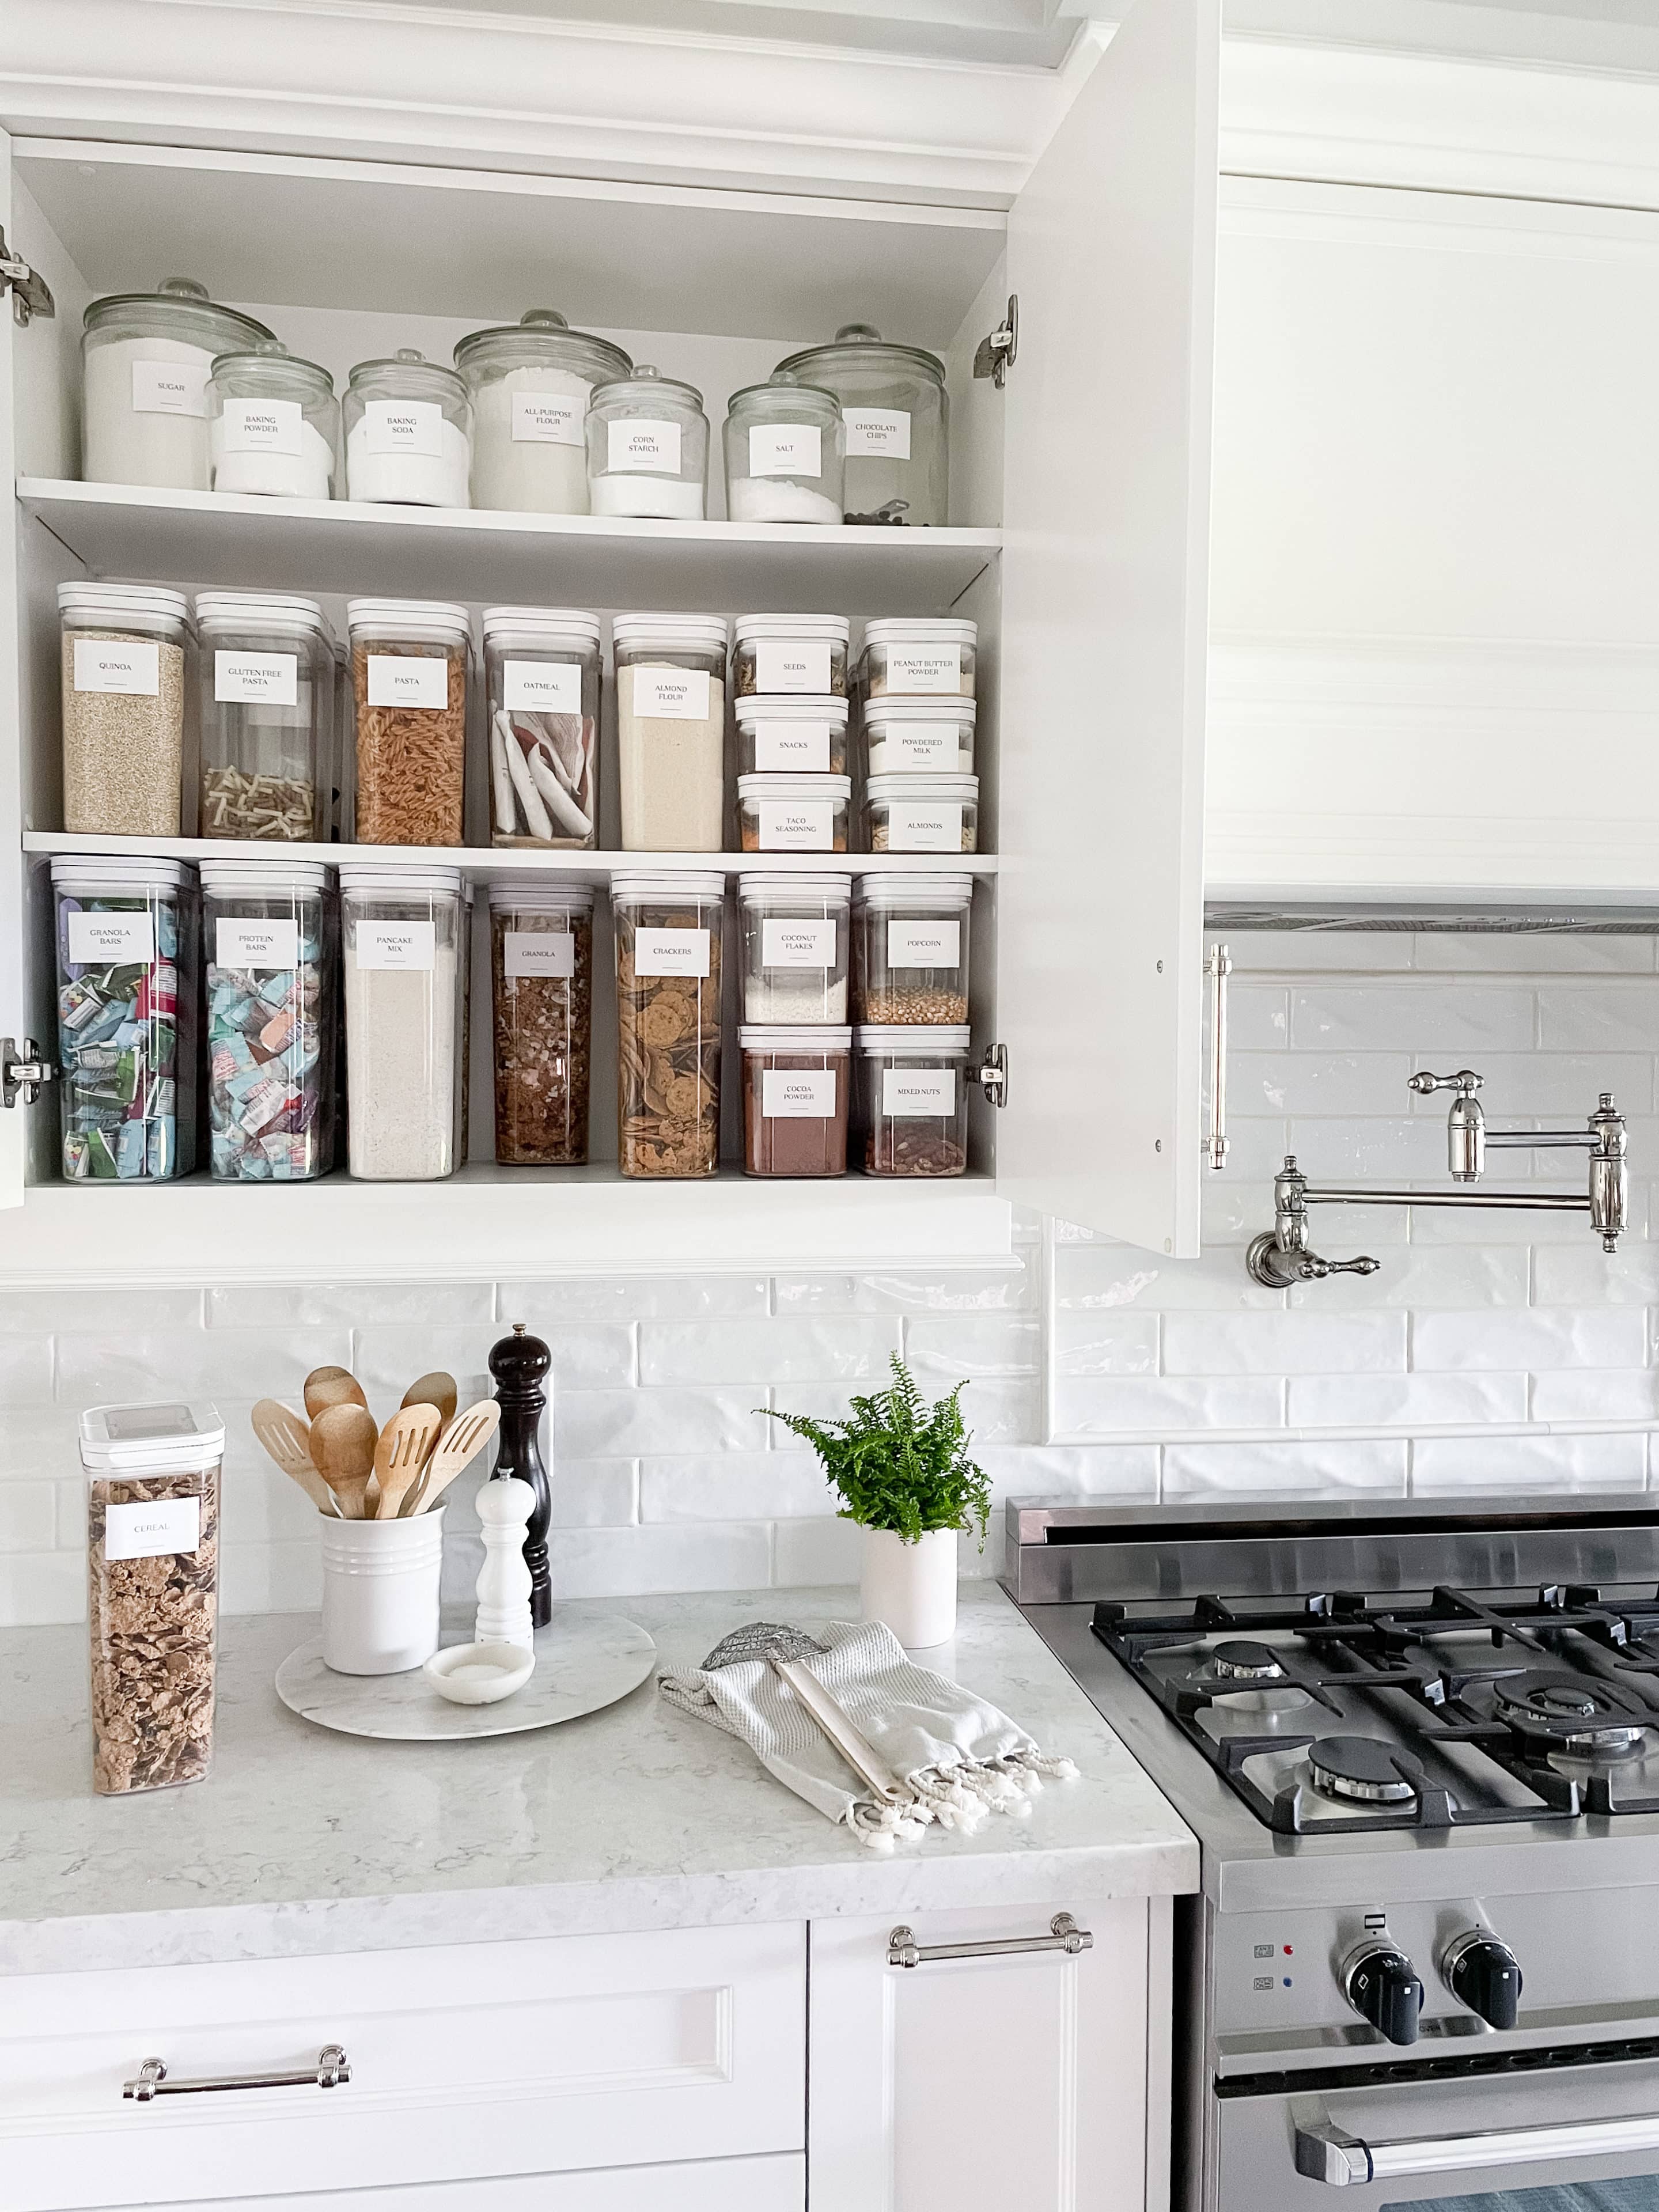 oPROFESSIONAL HOME ORGANIZER SERVICES Organizing and decluttered kitchen shelves